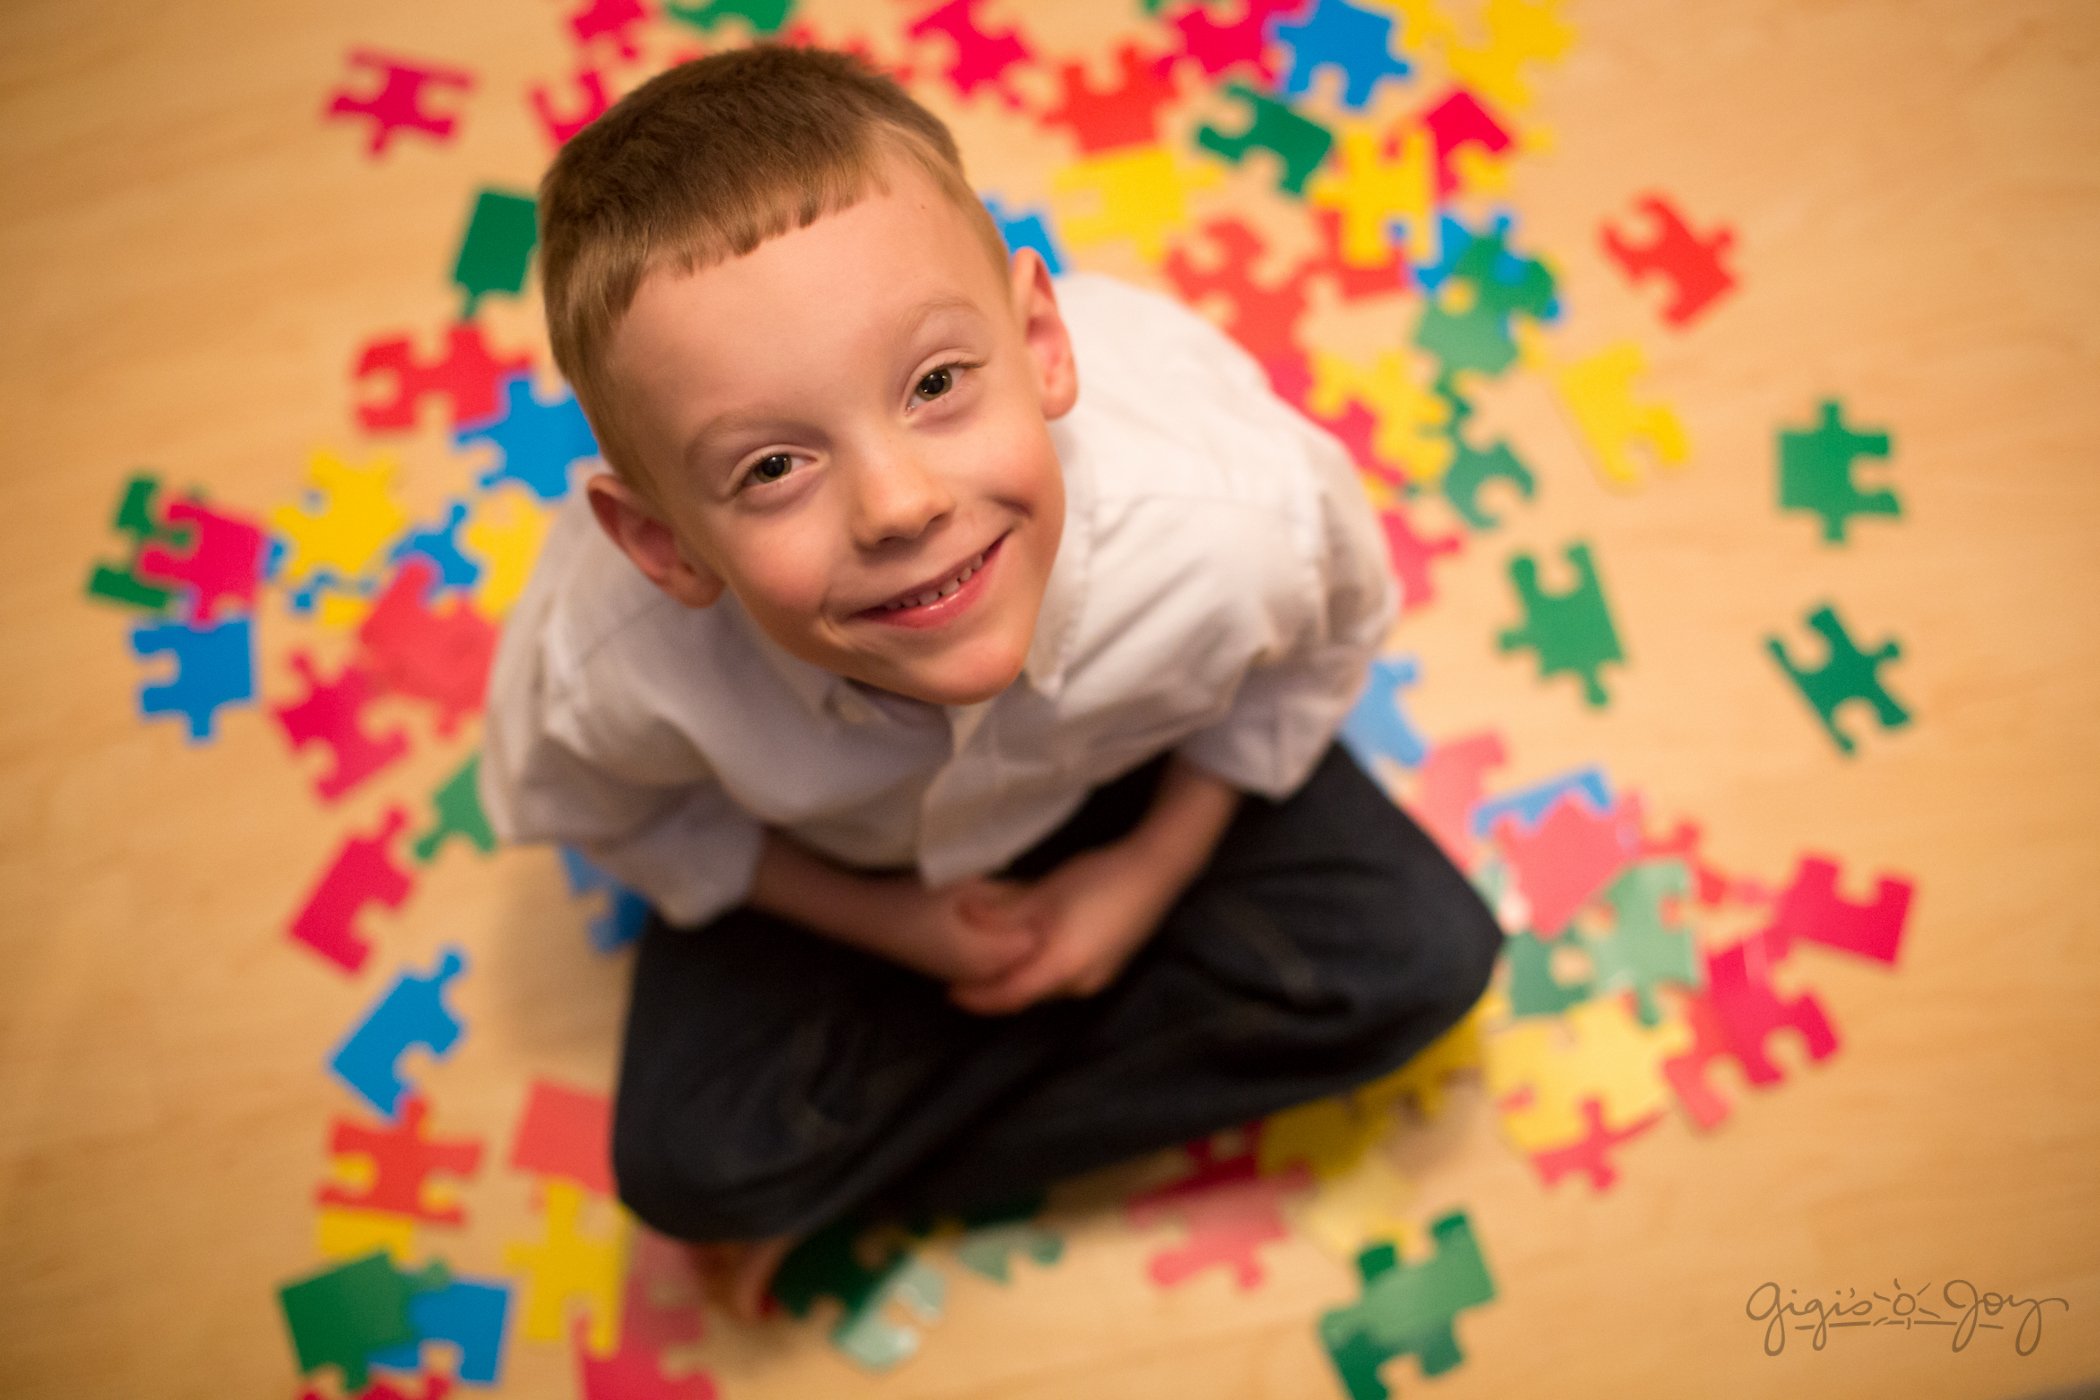 Typical Characteristics of Autism Spectrum Disorder